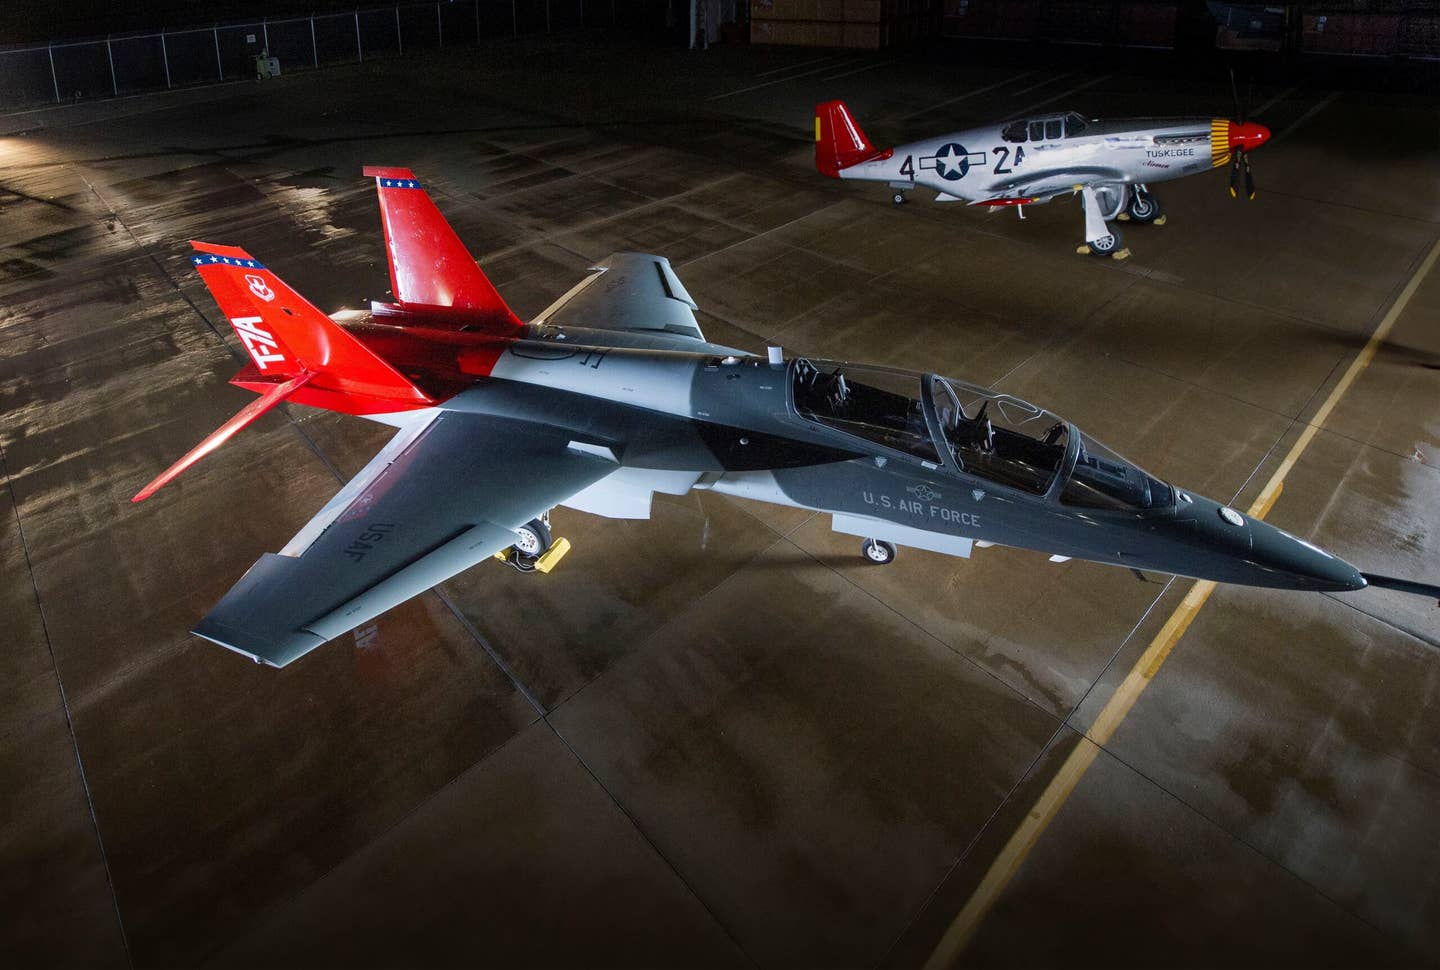 The T-7 Red Hawk win for Boeing was huge and came at a very important time, but delays in the program are resulting in it becoming a financial burden, at least in the short term, for the famed plane maker. (Boeing)